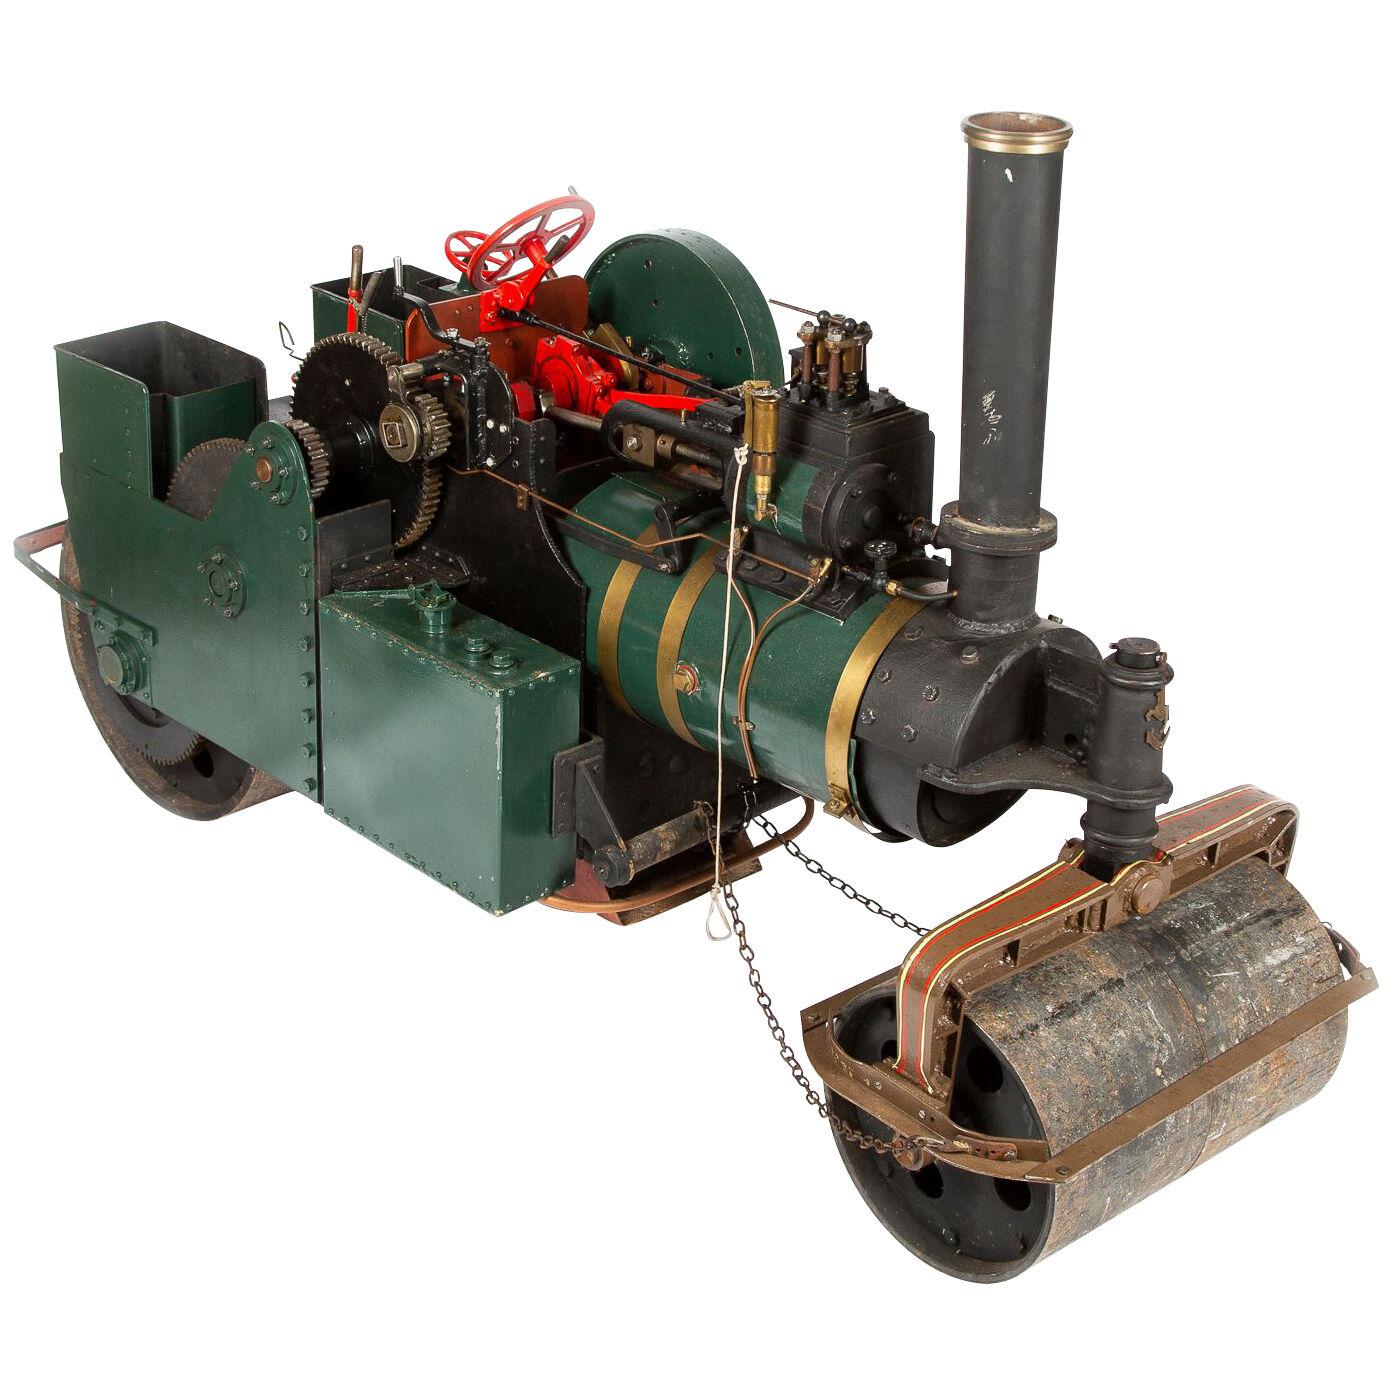 A large scale model of an Aveling & Porter steam roller